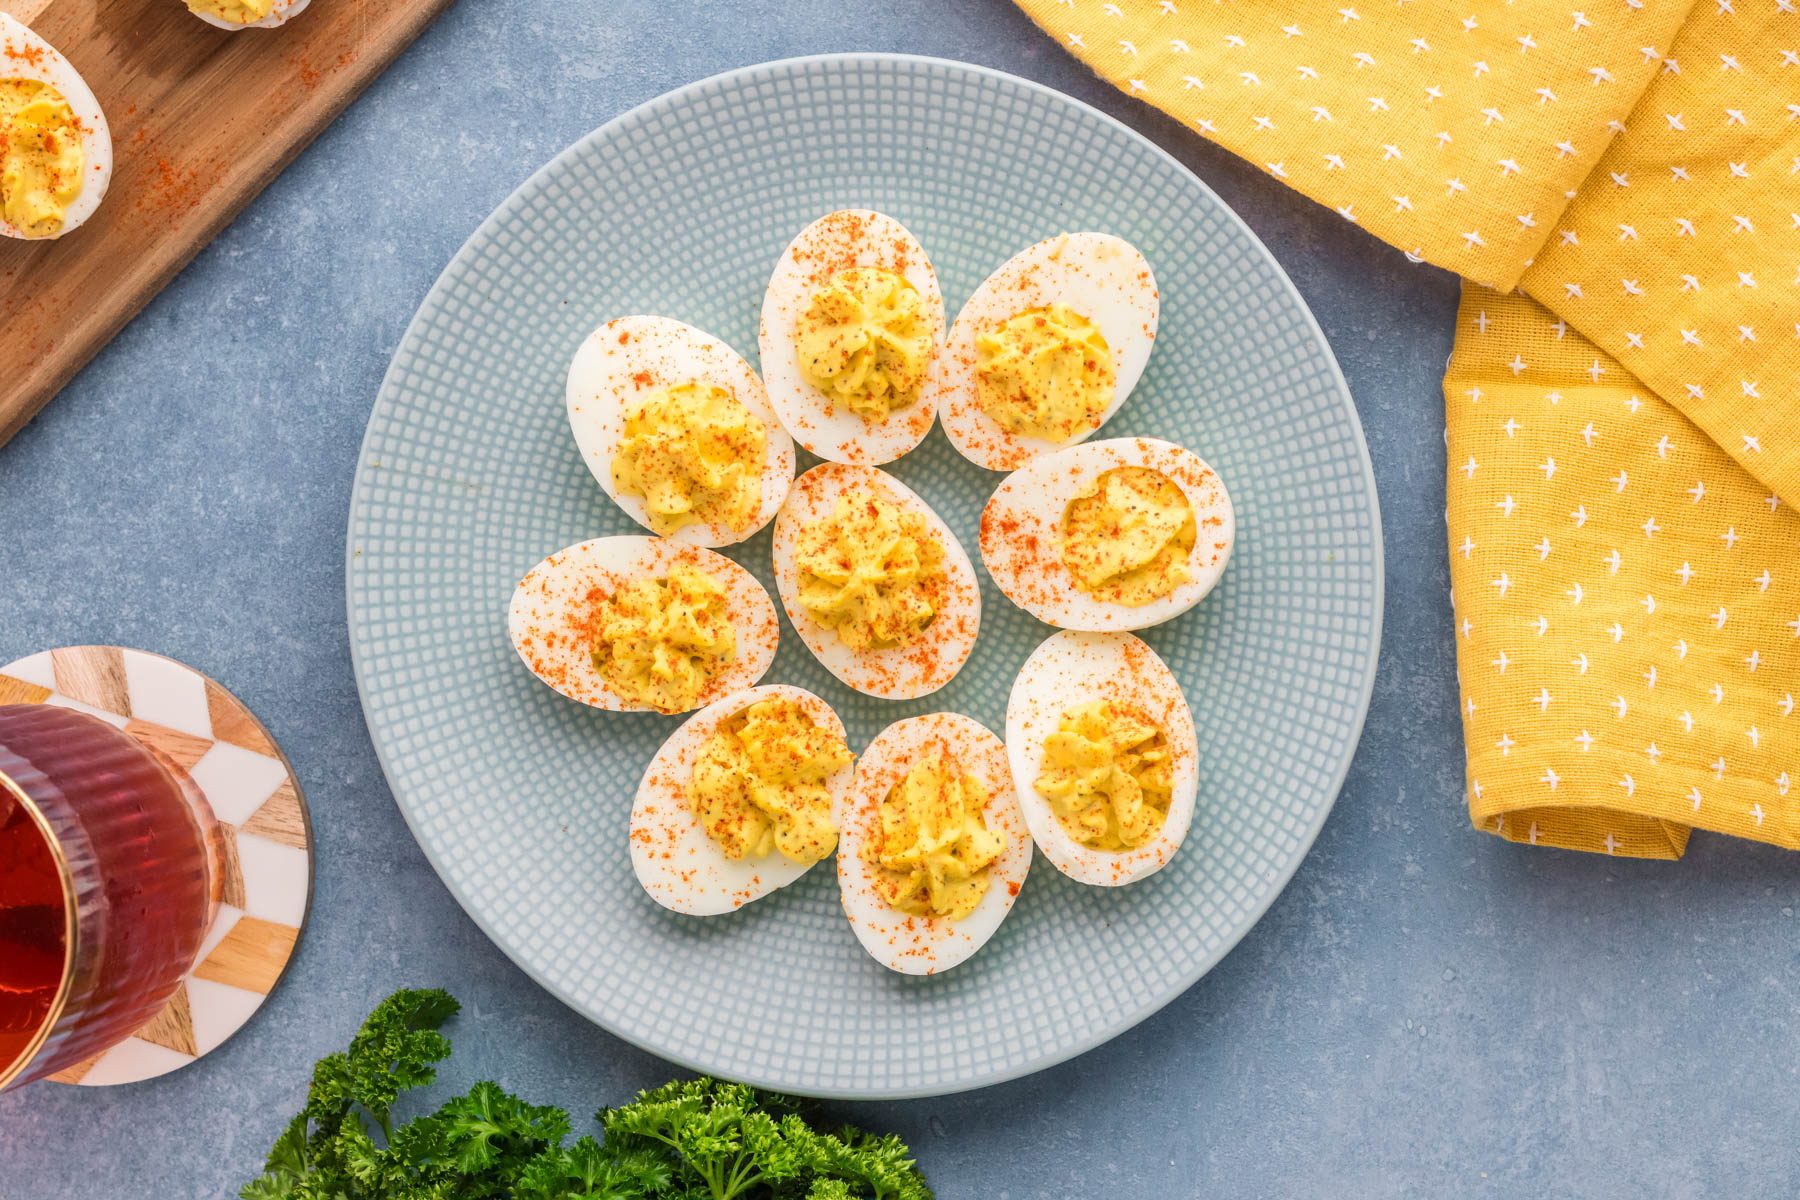 Plate of deviled eggs garnished with paprika on a blue plate.